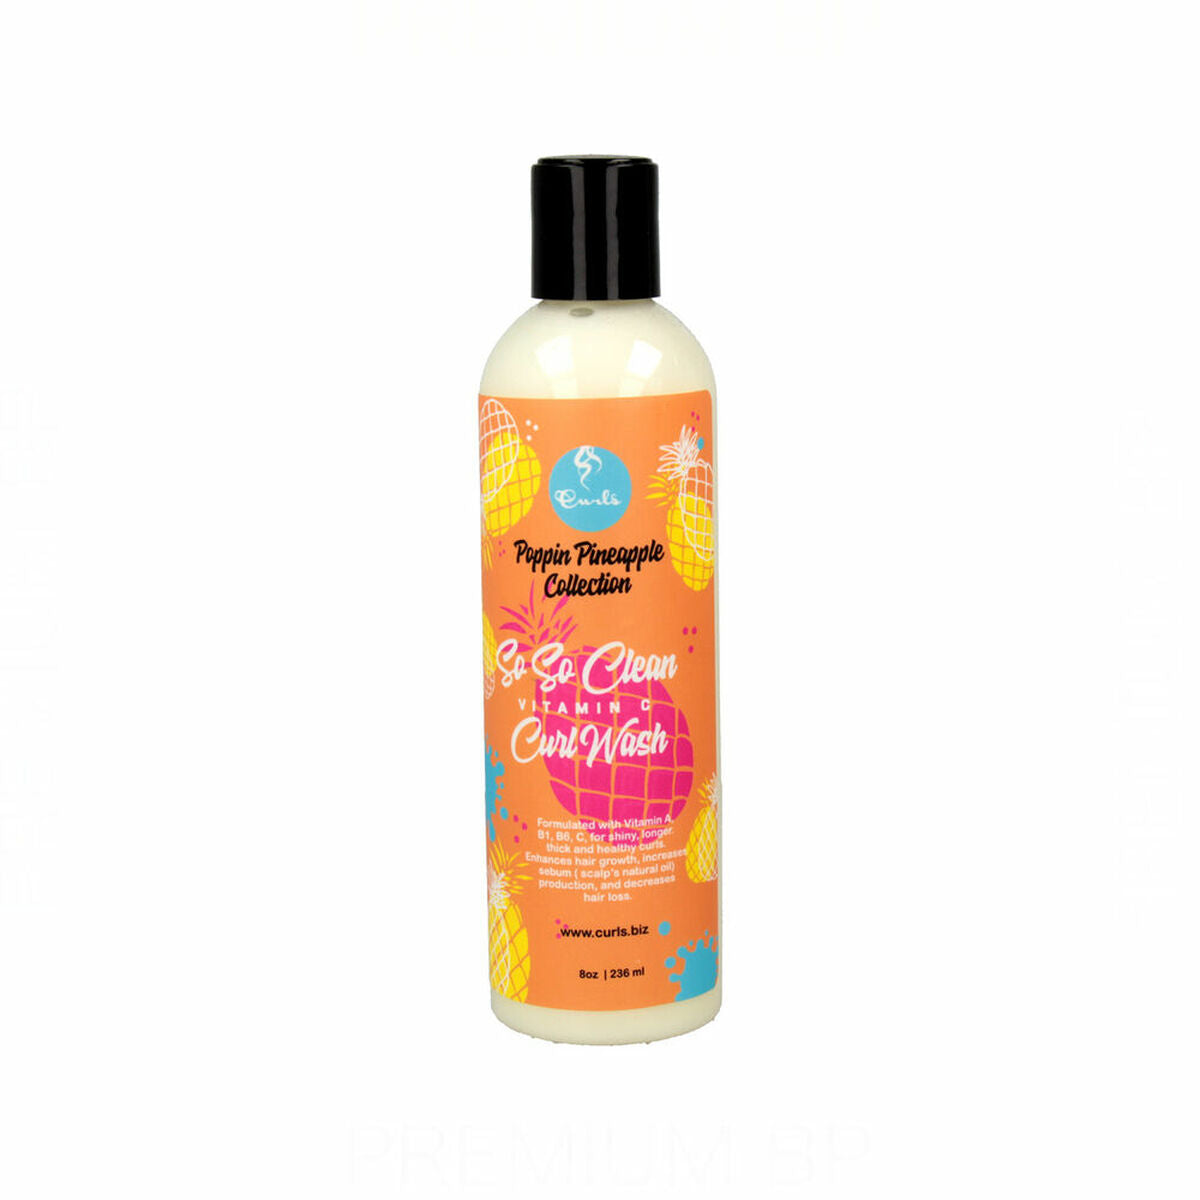 Après-shampooing boucles Poppin Pineapple Collection So So Clean Curl Wash (236 ml)